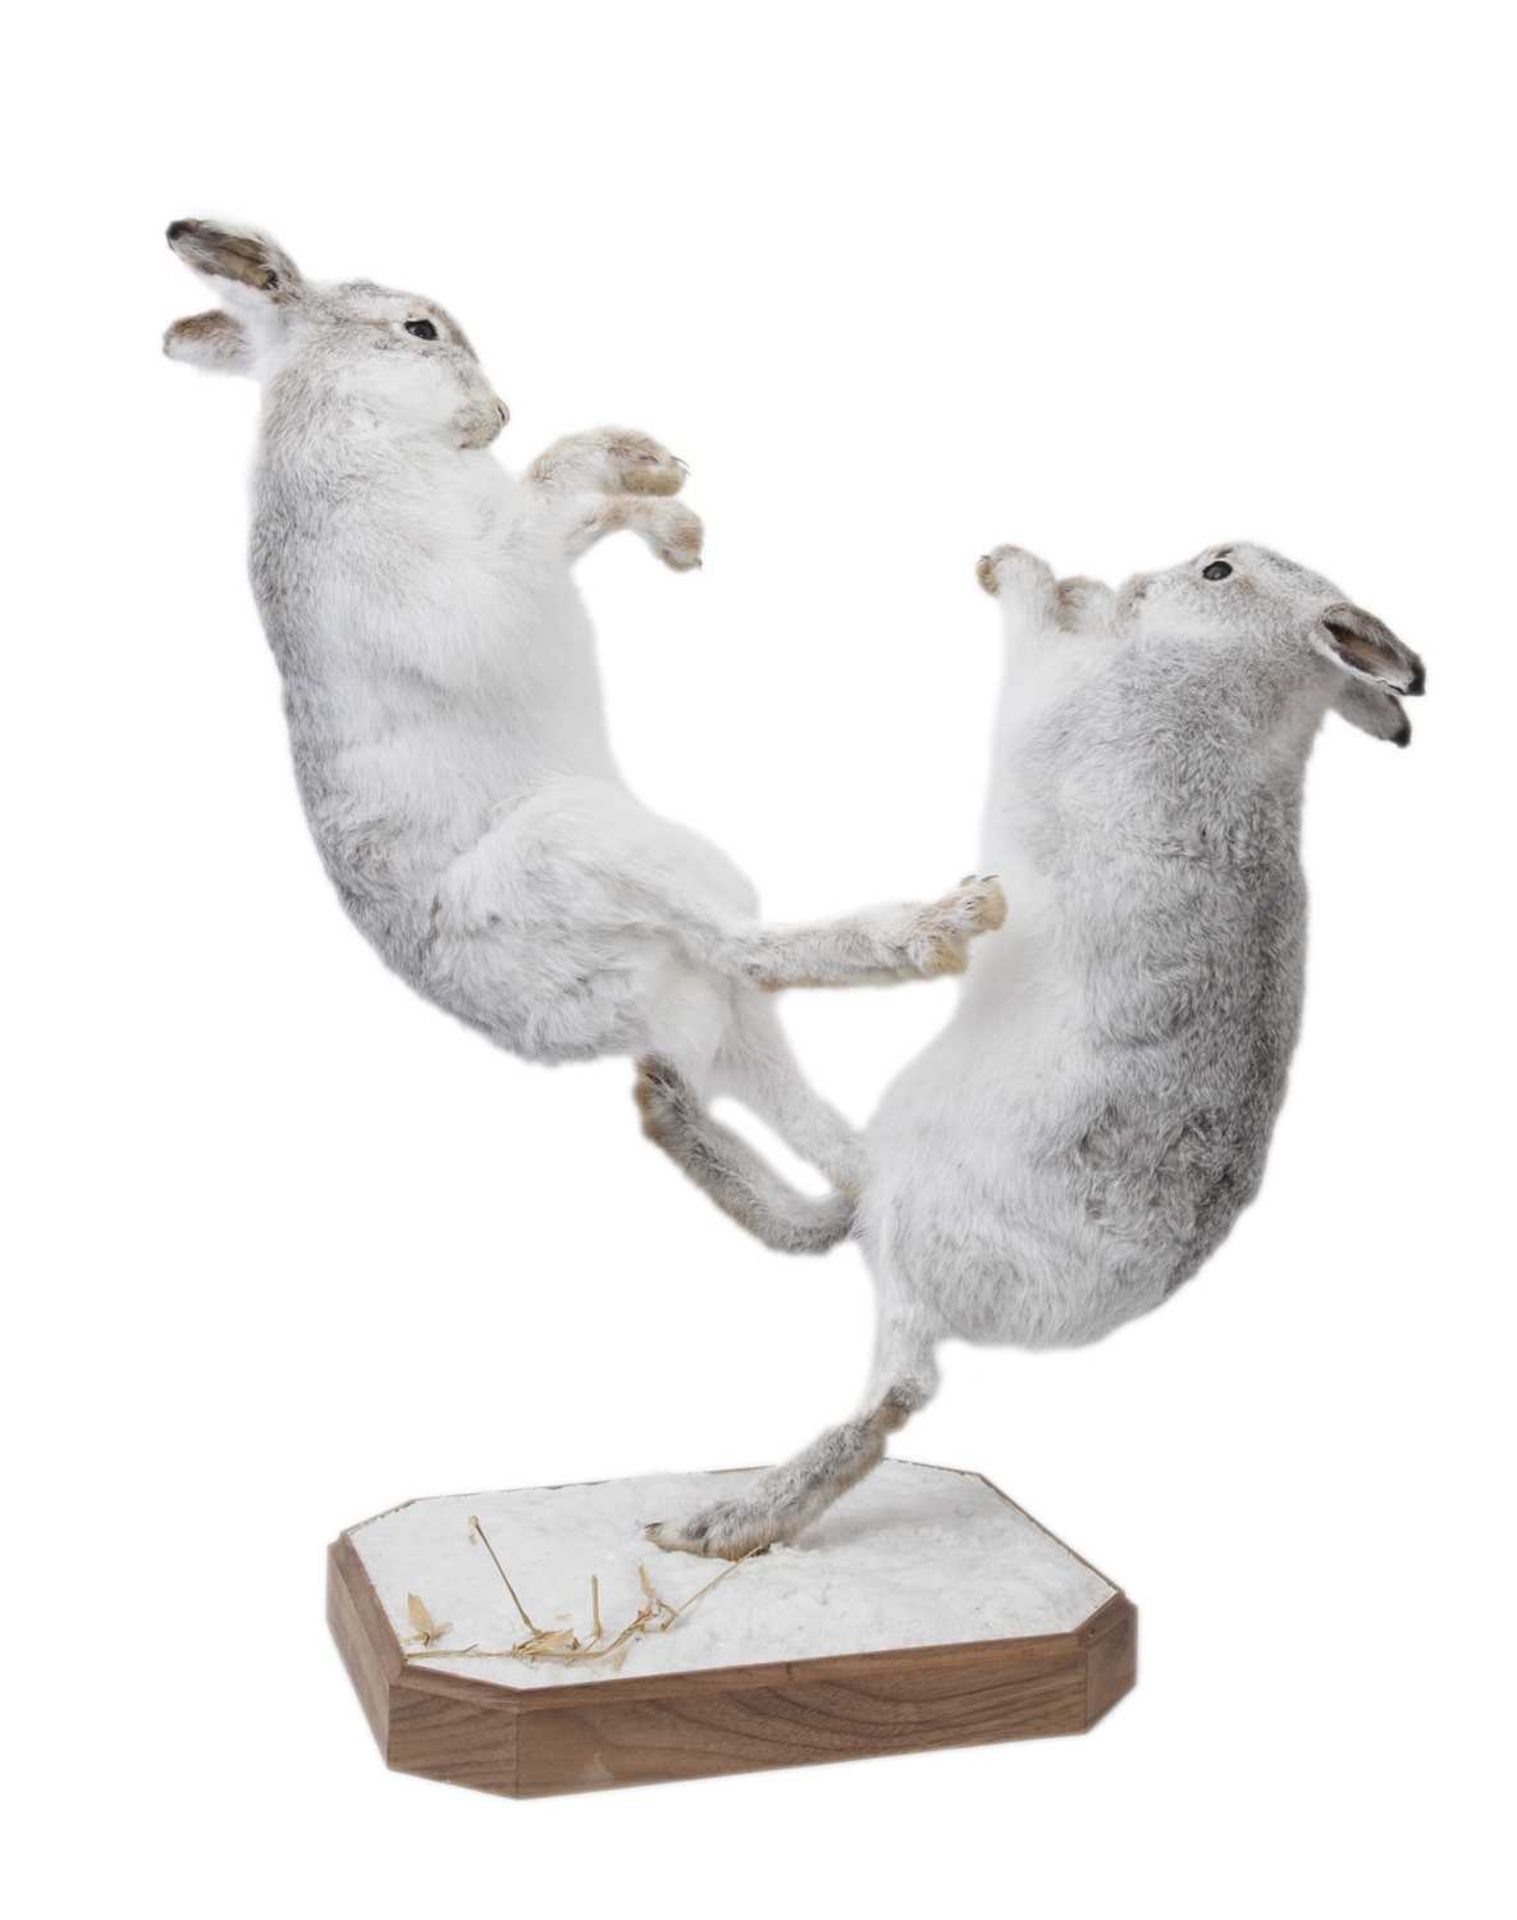 A TAXIDERMY STUDY OF A PAIR OF BOXING SCOTTISH MOUNTAIN HARES (LEPUS TIMIDUS) - Image 3 of 3